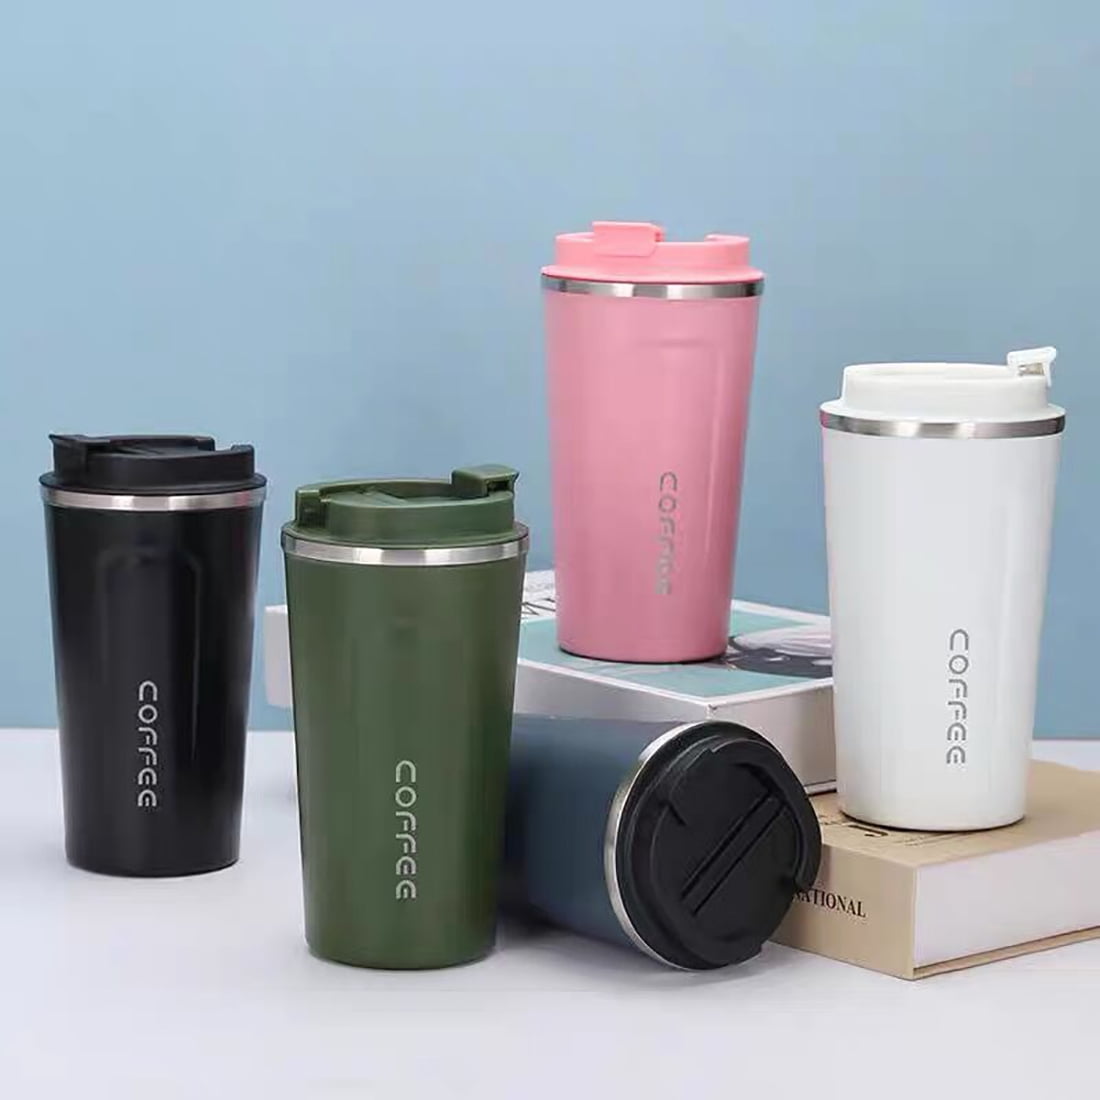 CHTENZY 13oz Insulated Travel Coffee Mug With Lid, Hot and Cold, Stainless  Steel Cups, Transparent L…See more CHTENZY 13oz Insulated Travel Coffee Mug